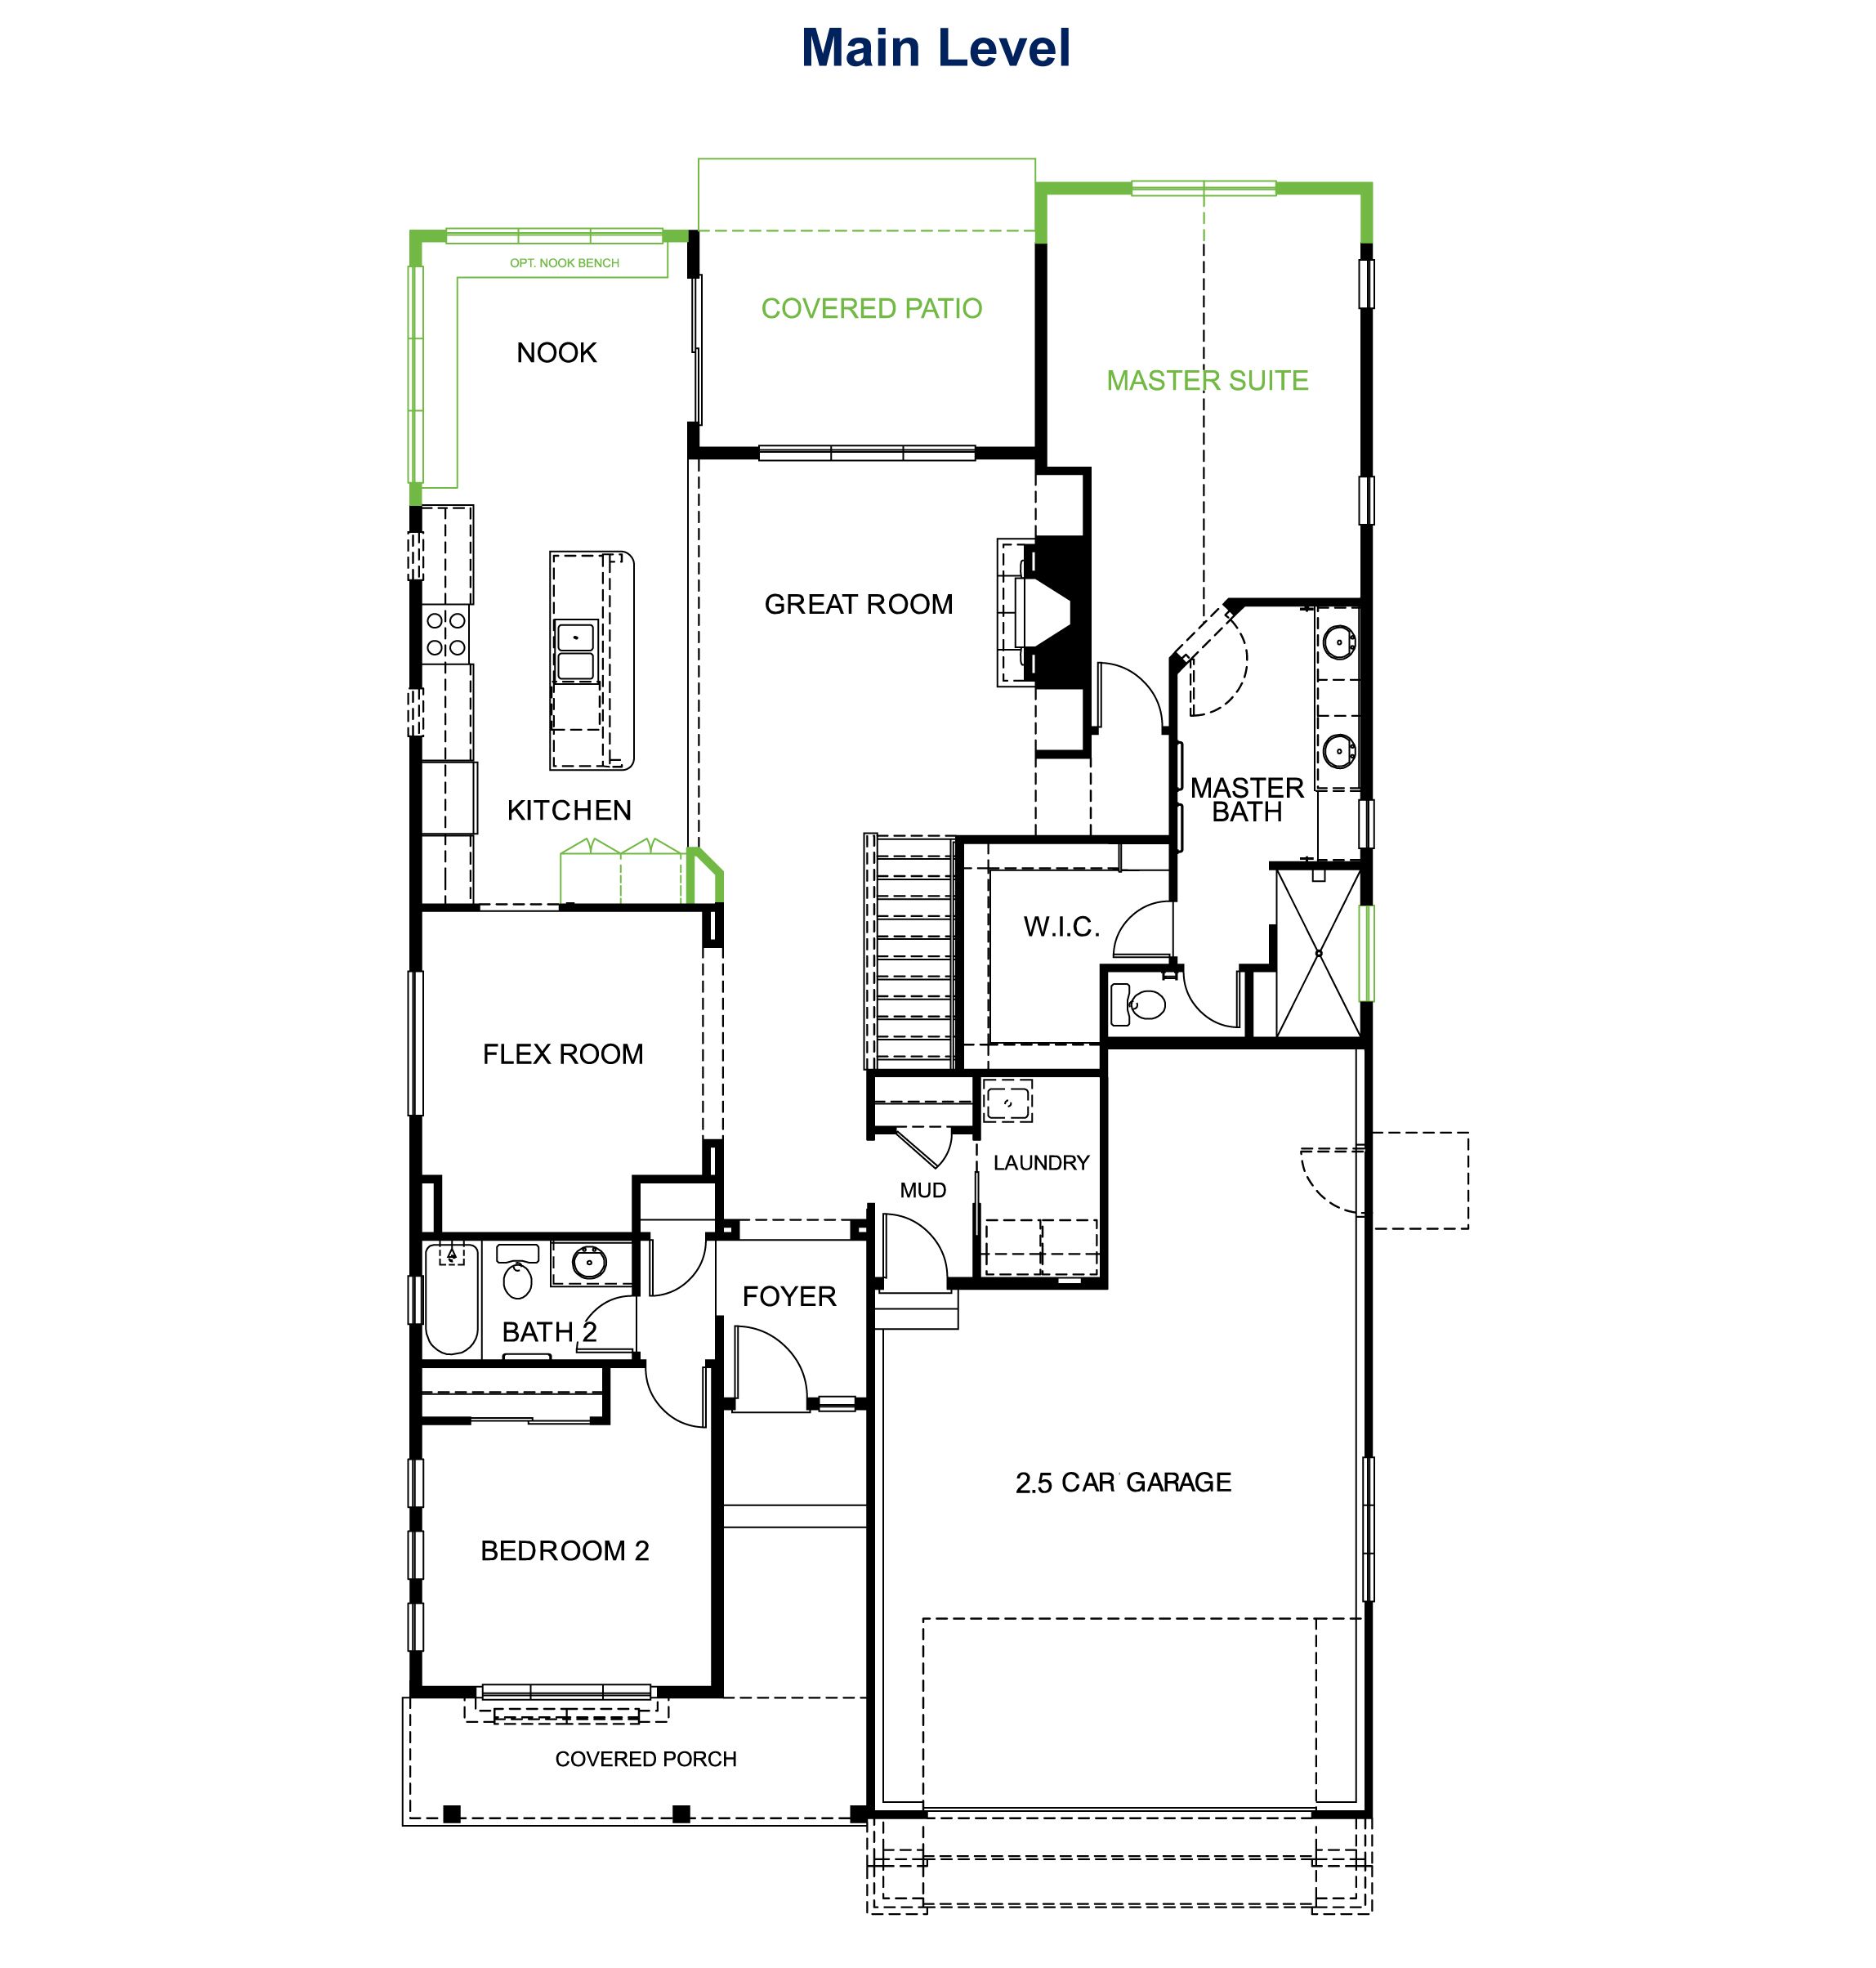 Main level floorplan. (subject to change without notice